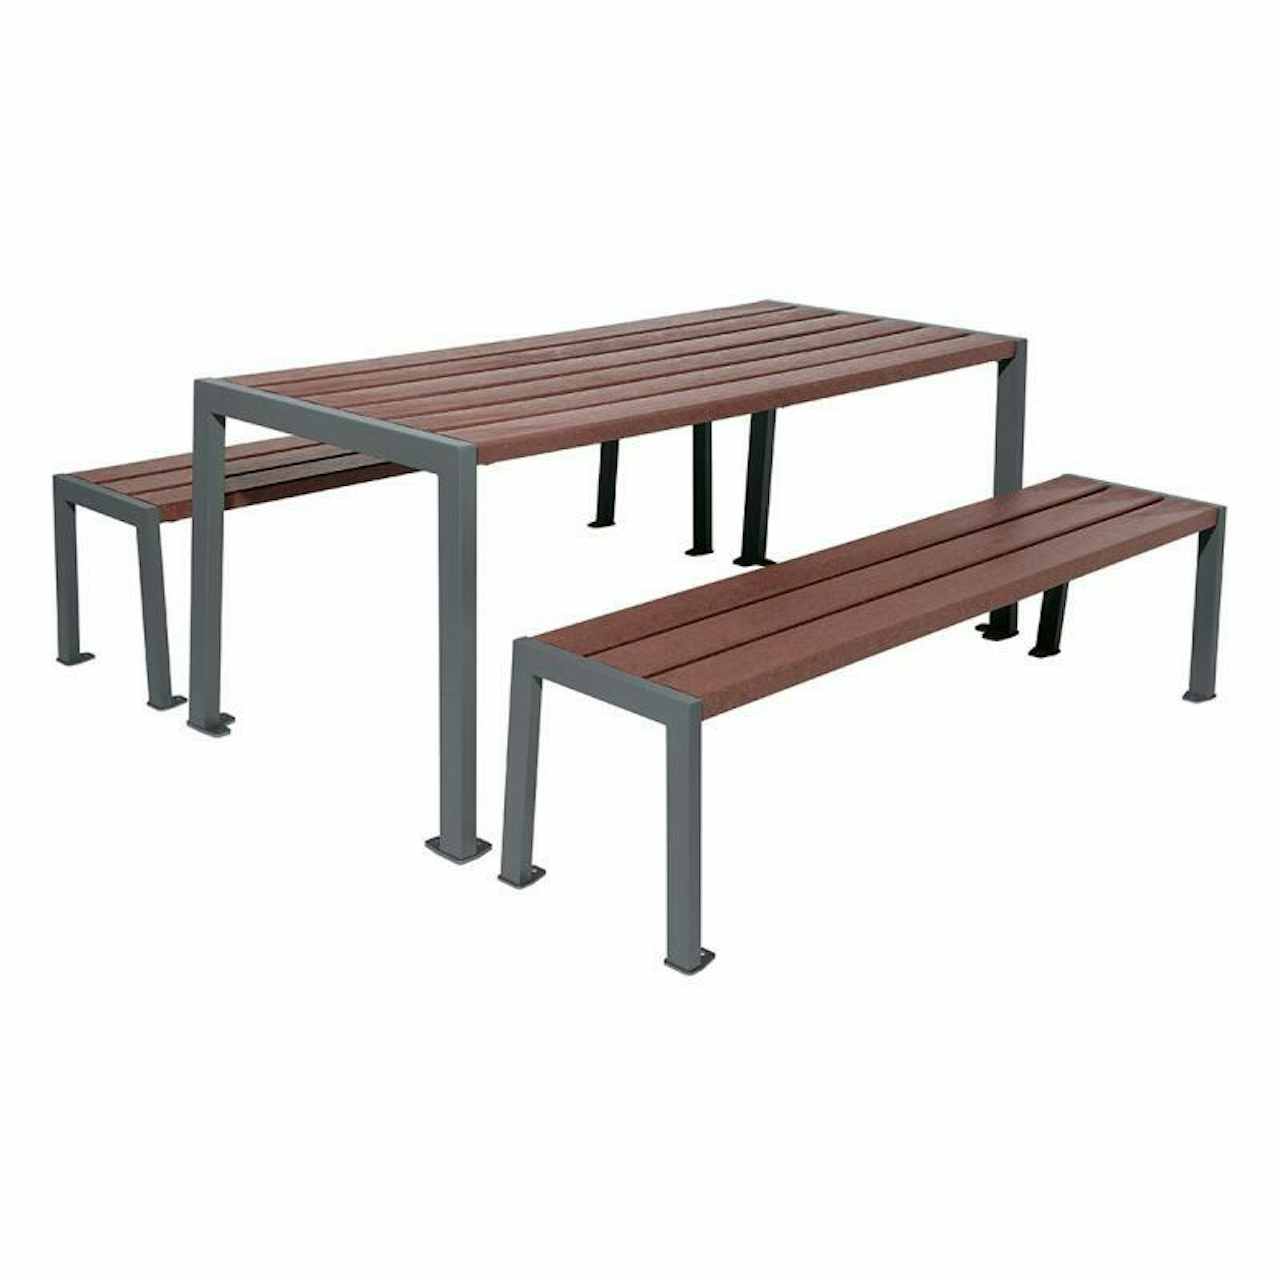 Silaos Recycled Plastic Picnic Table Set